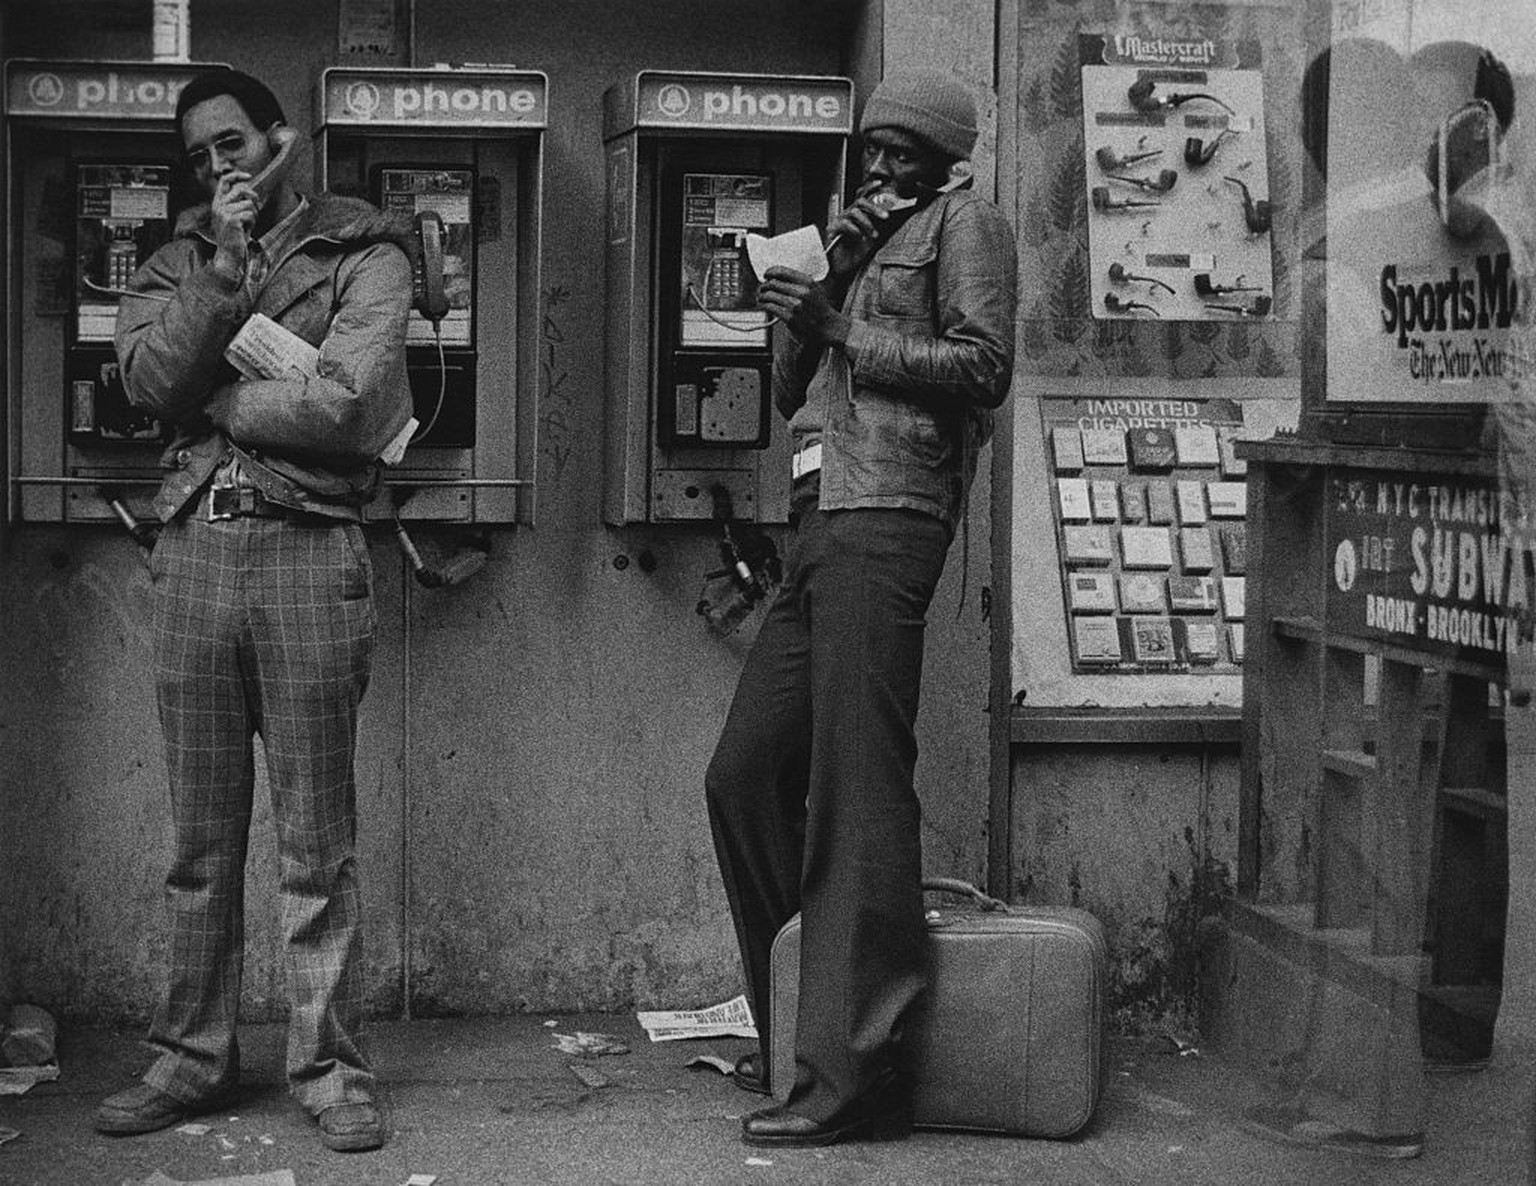 Two young men make phonecalls on a payphone by a subway station near Times Square, New York City, circa 1975. (Photo by Erika Stone/Getty Images)